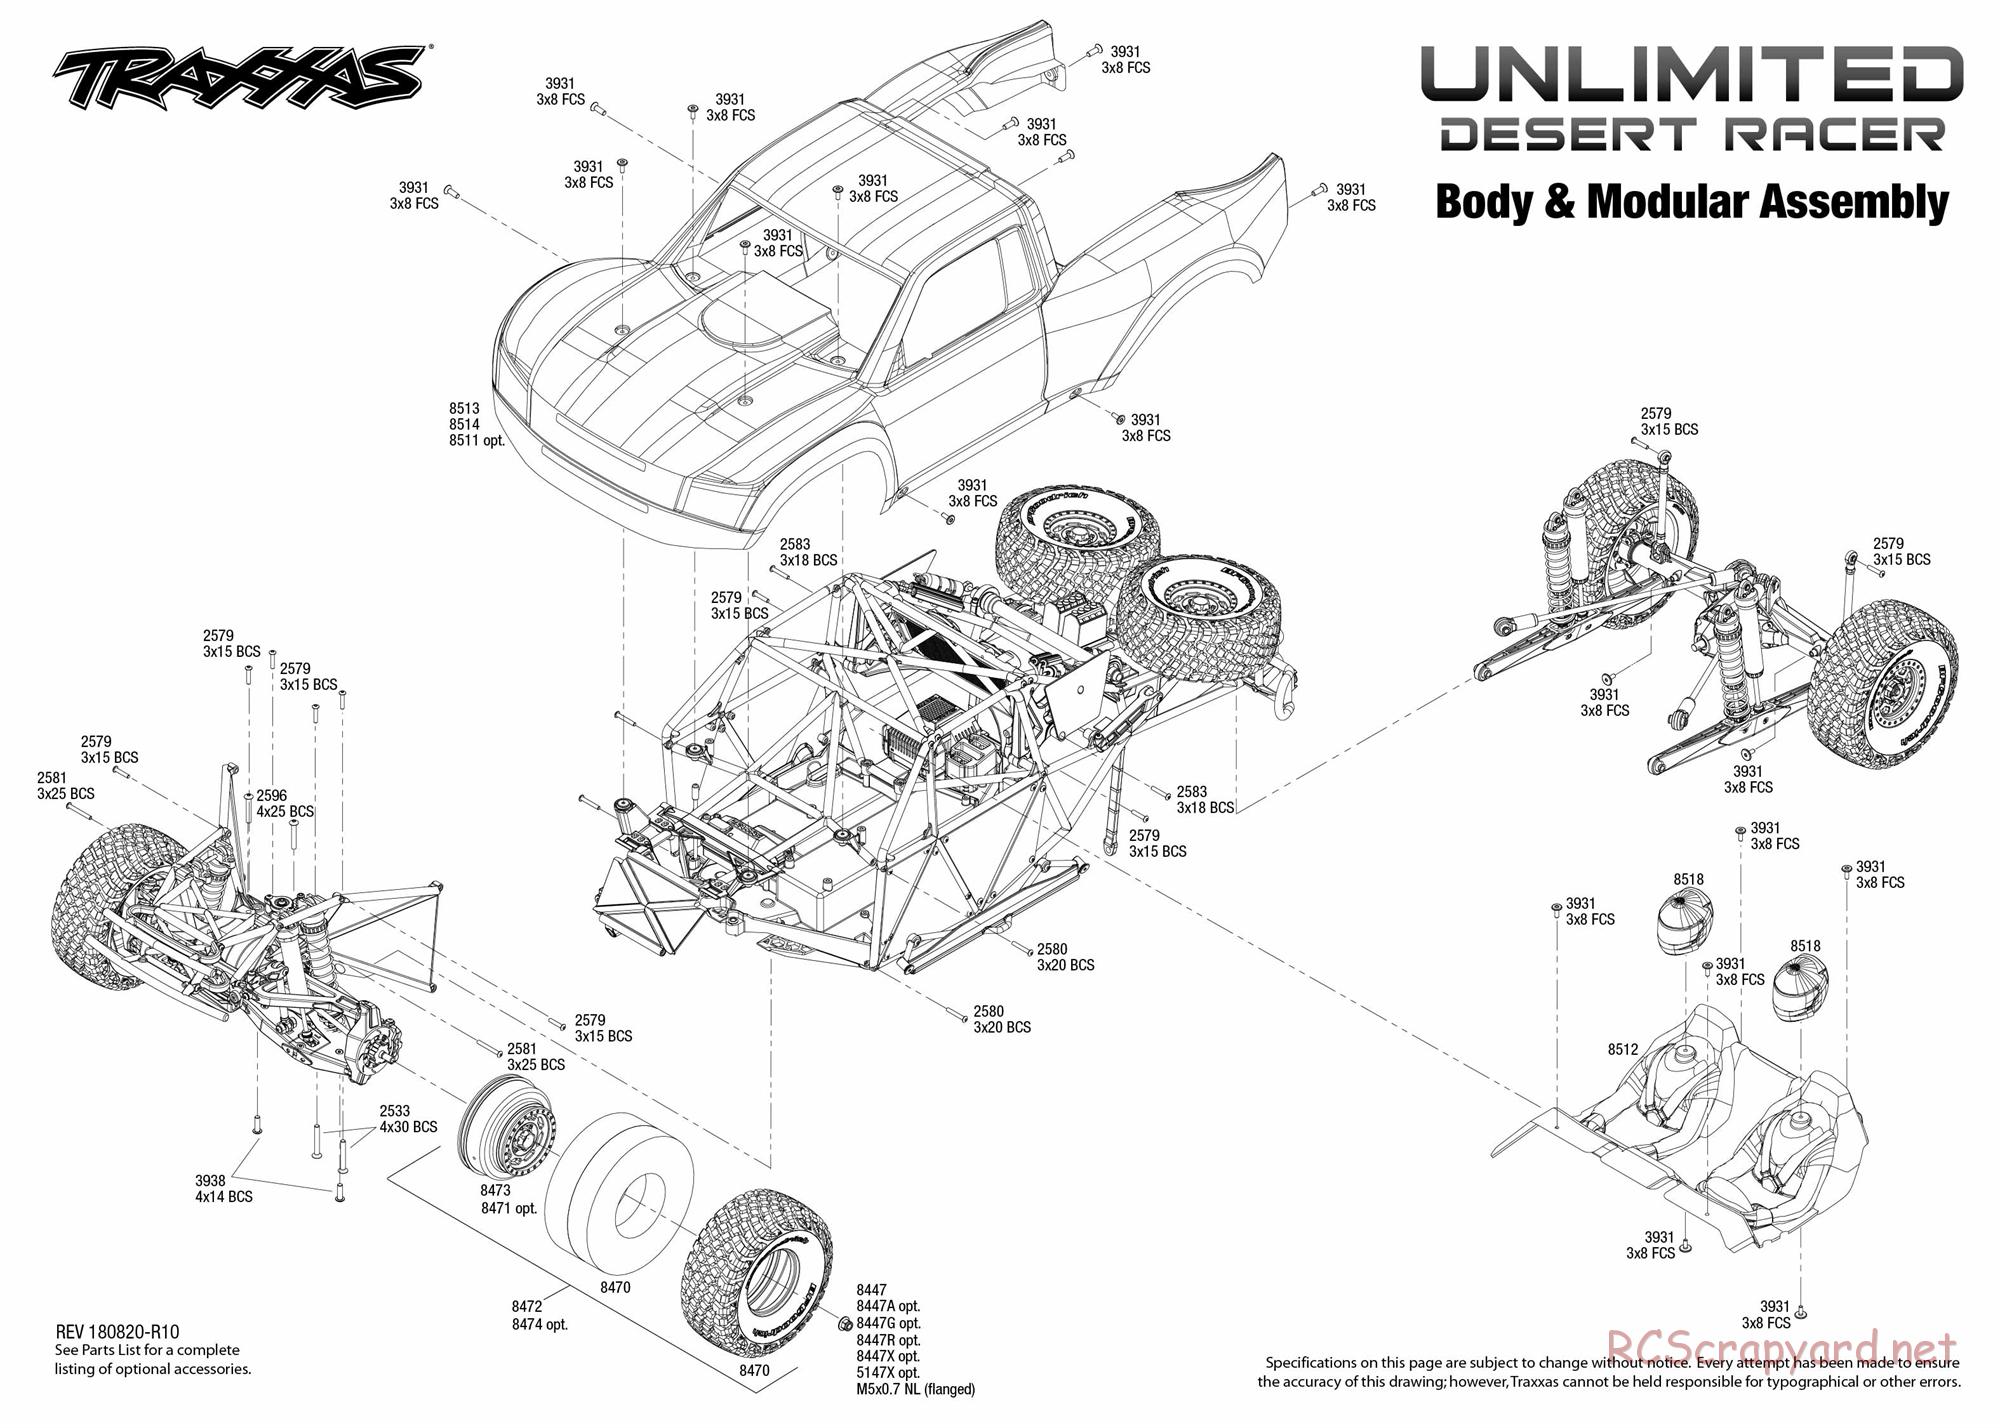 Traxxas - Unlimited Desert Racer VXL TSM (2018) - Exploded Views - Page 1